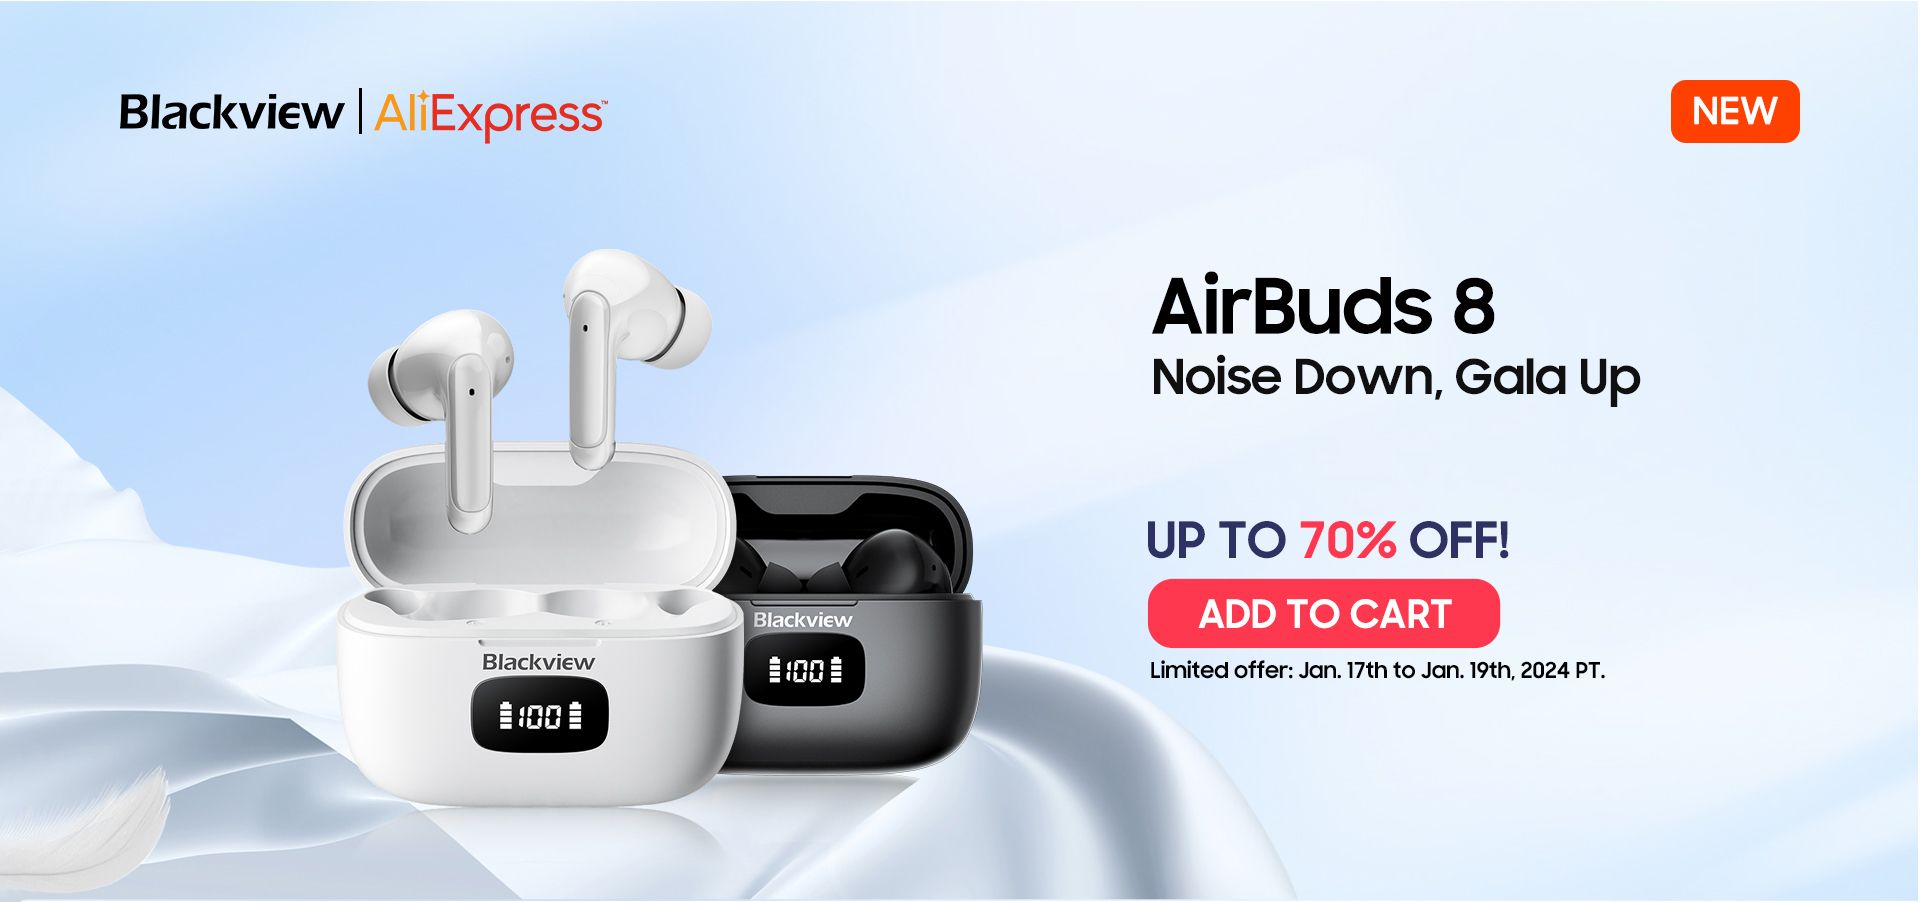 Blackview Airbuds 8